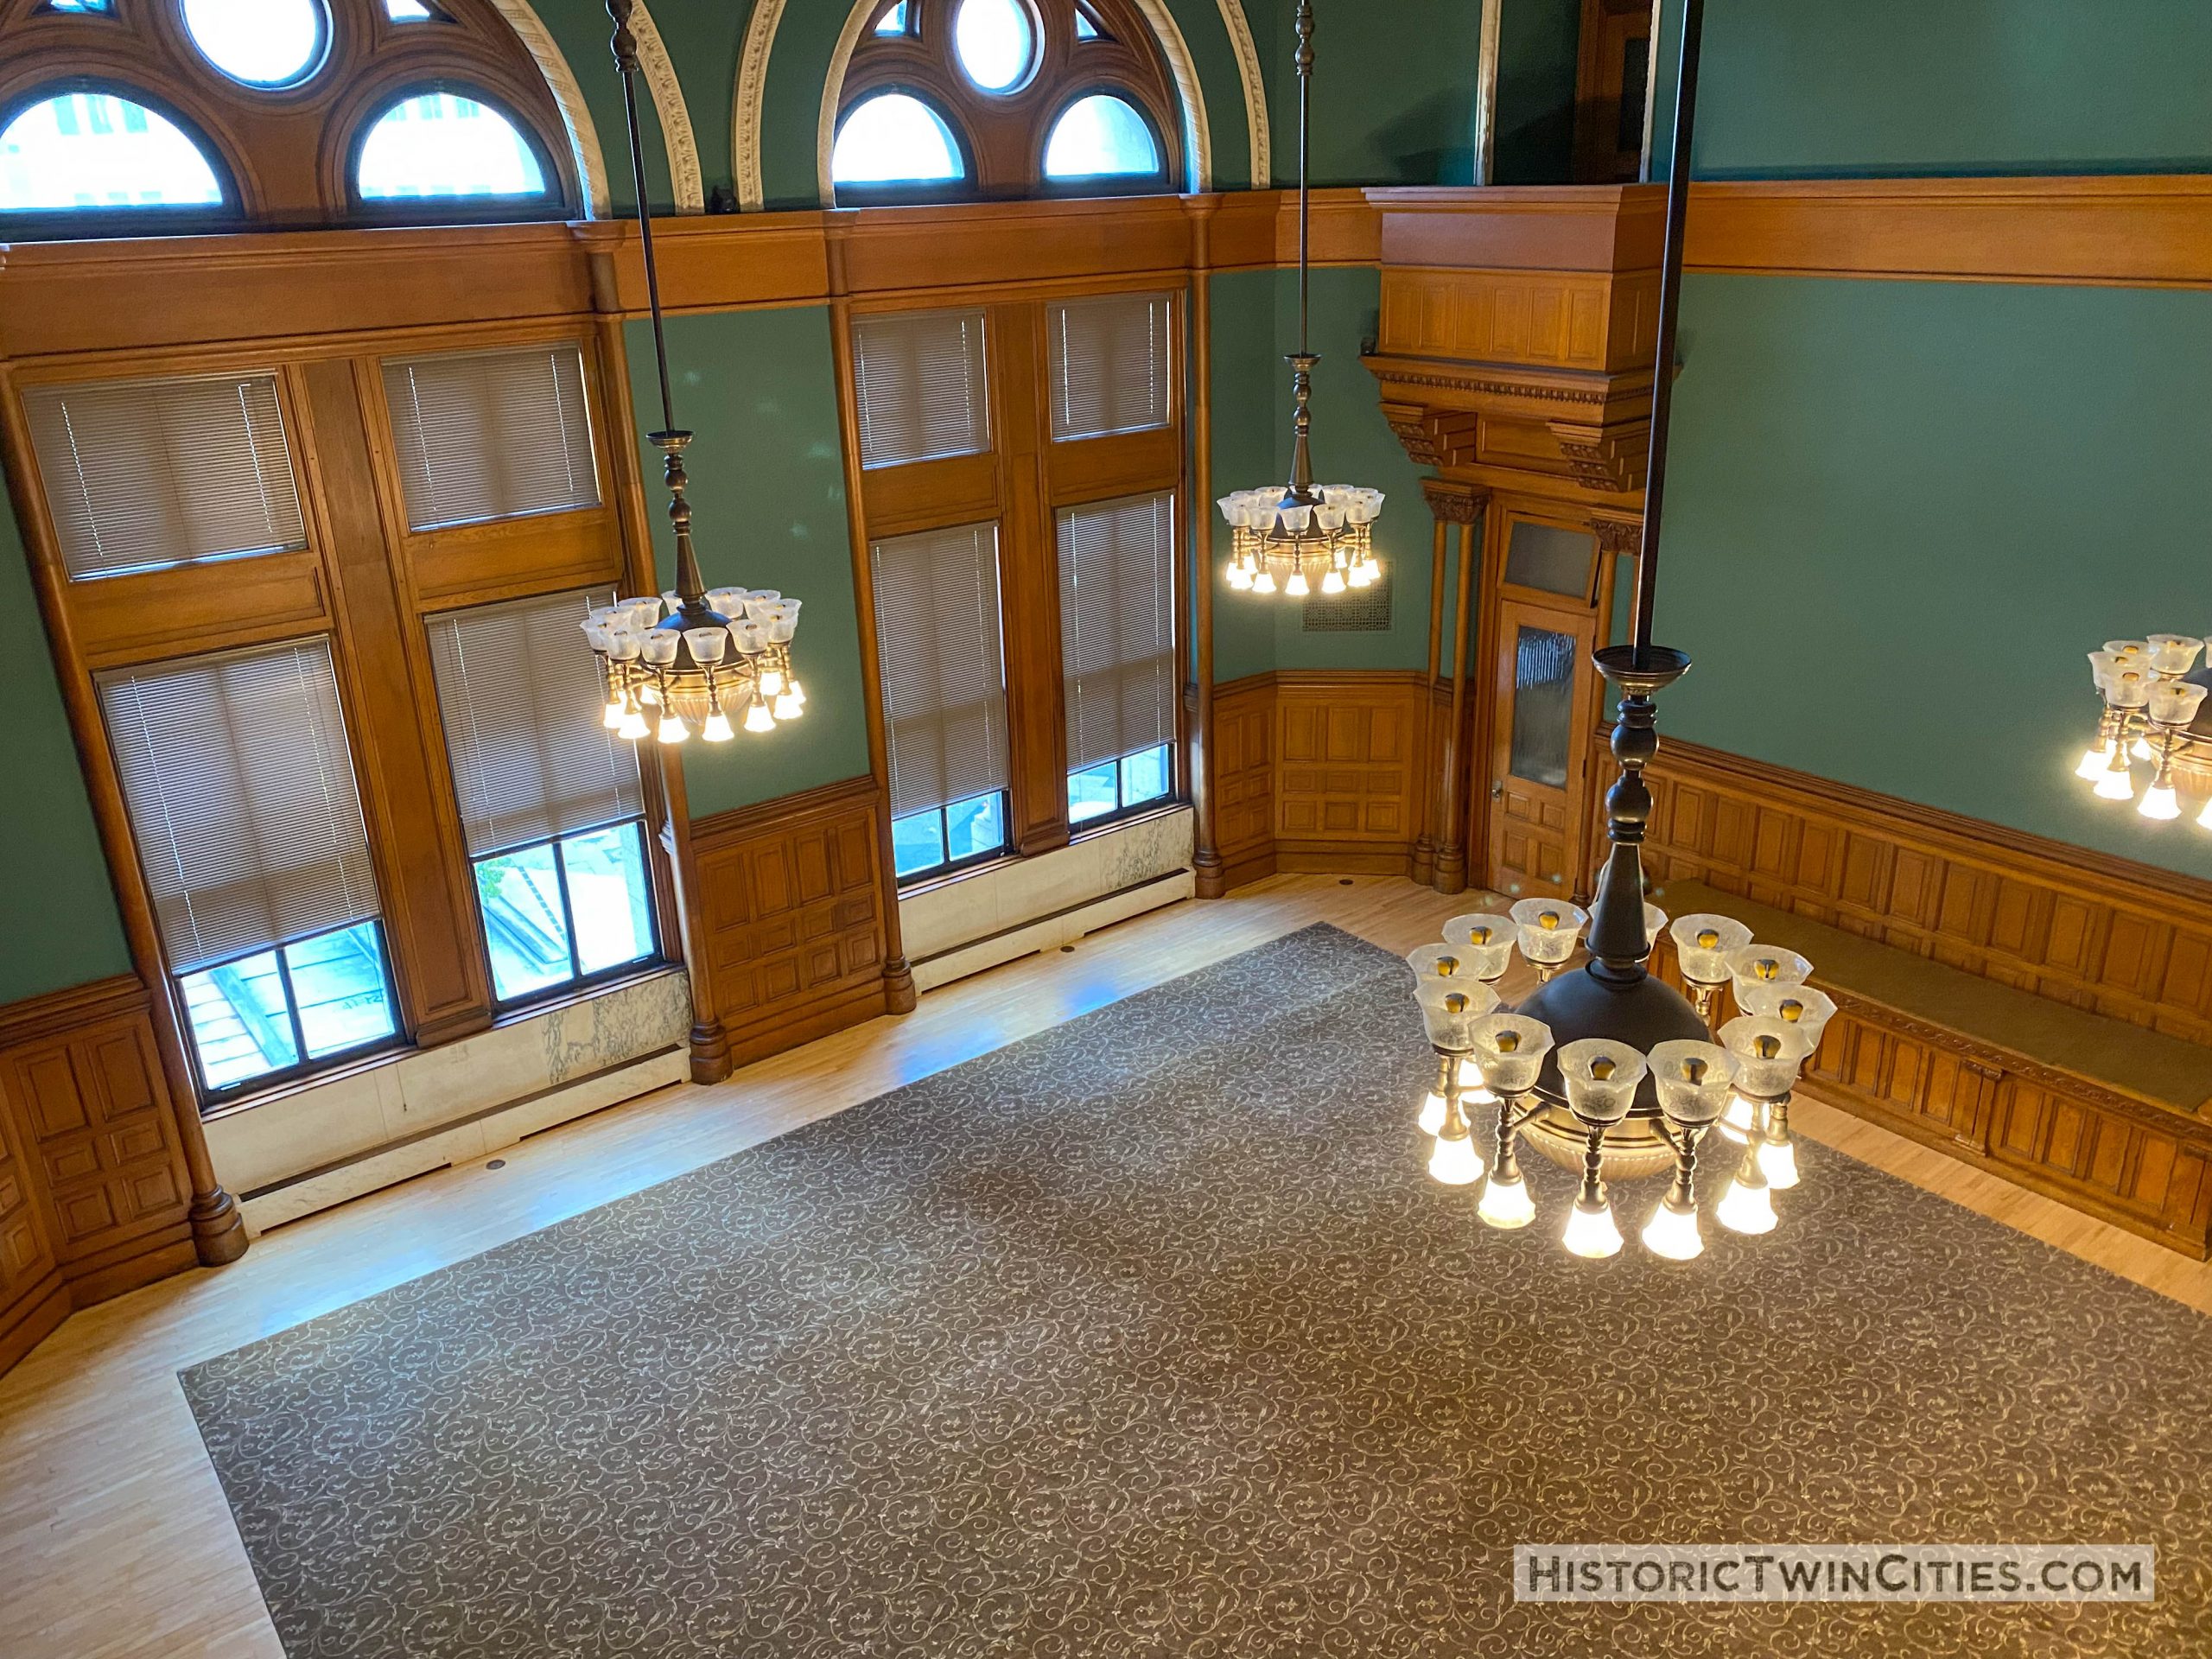 The Ramsey County Room (Courtroom 317) of the Landmark Center in St. Paul, MN